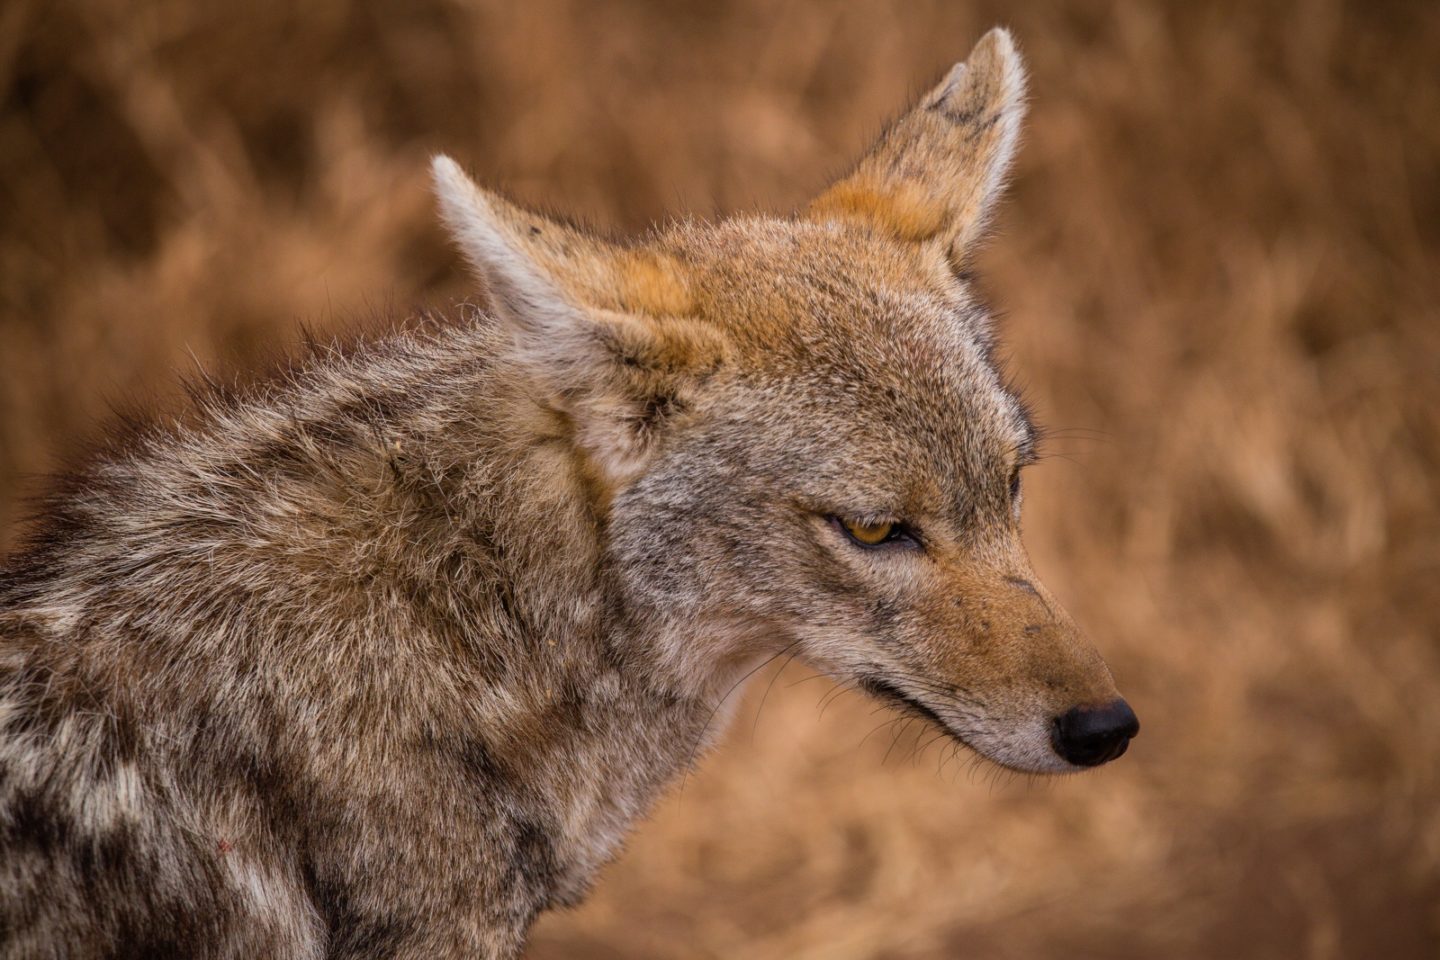 Jackal close up in the Ngorongoro crater.